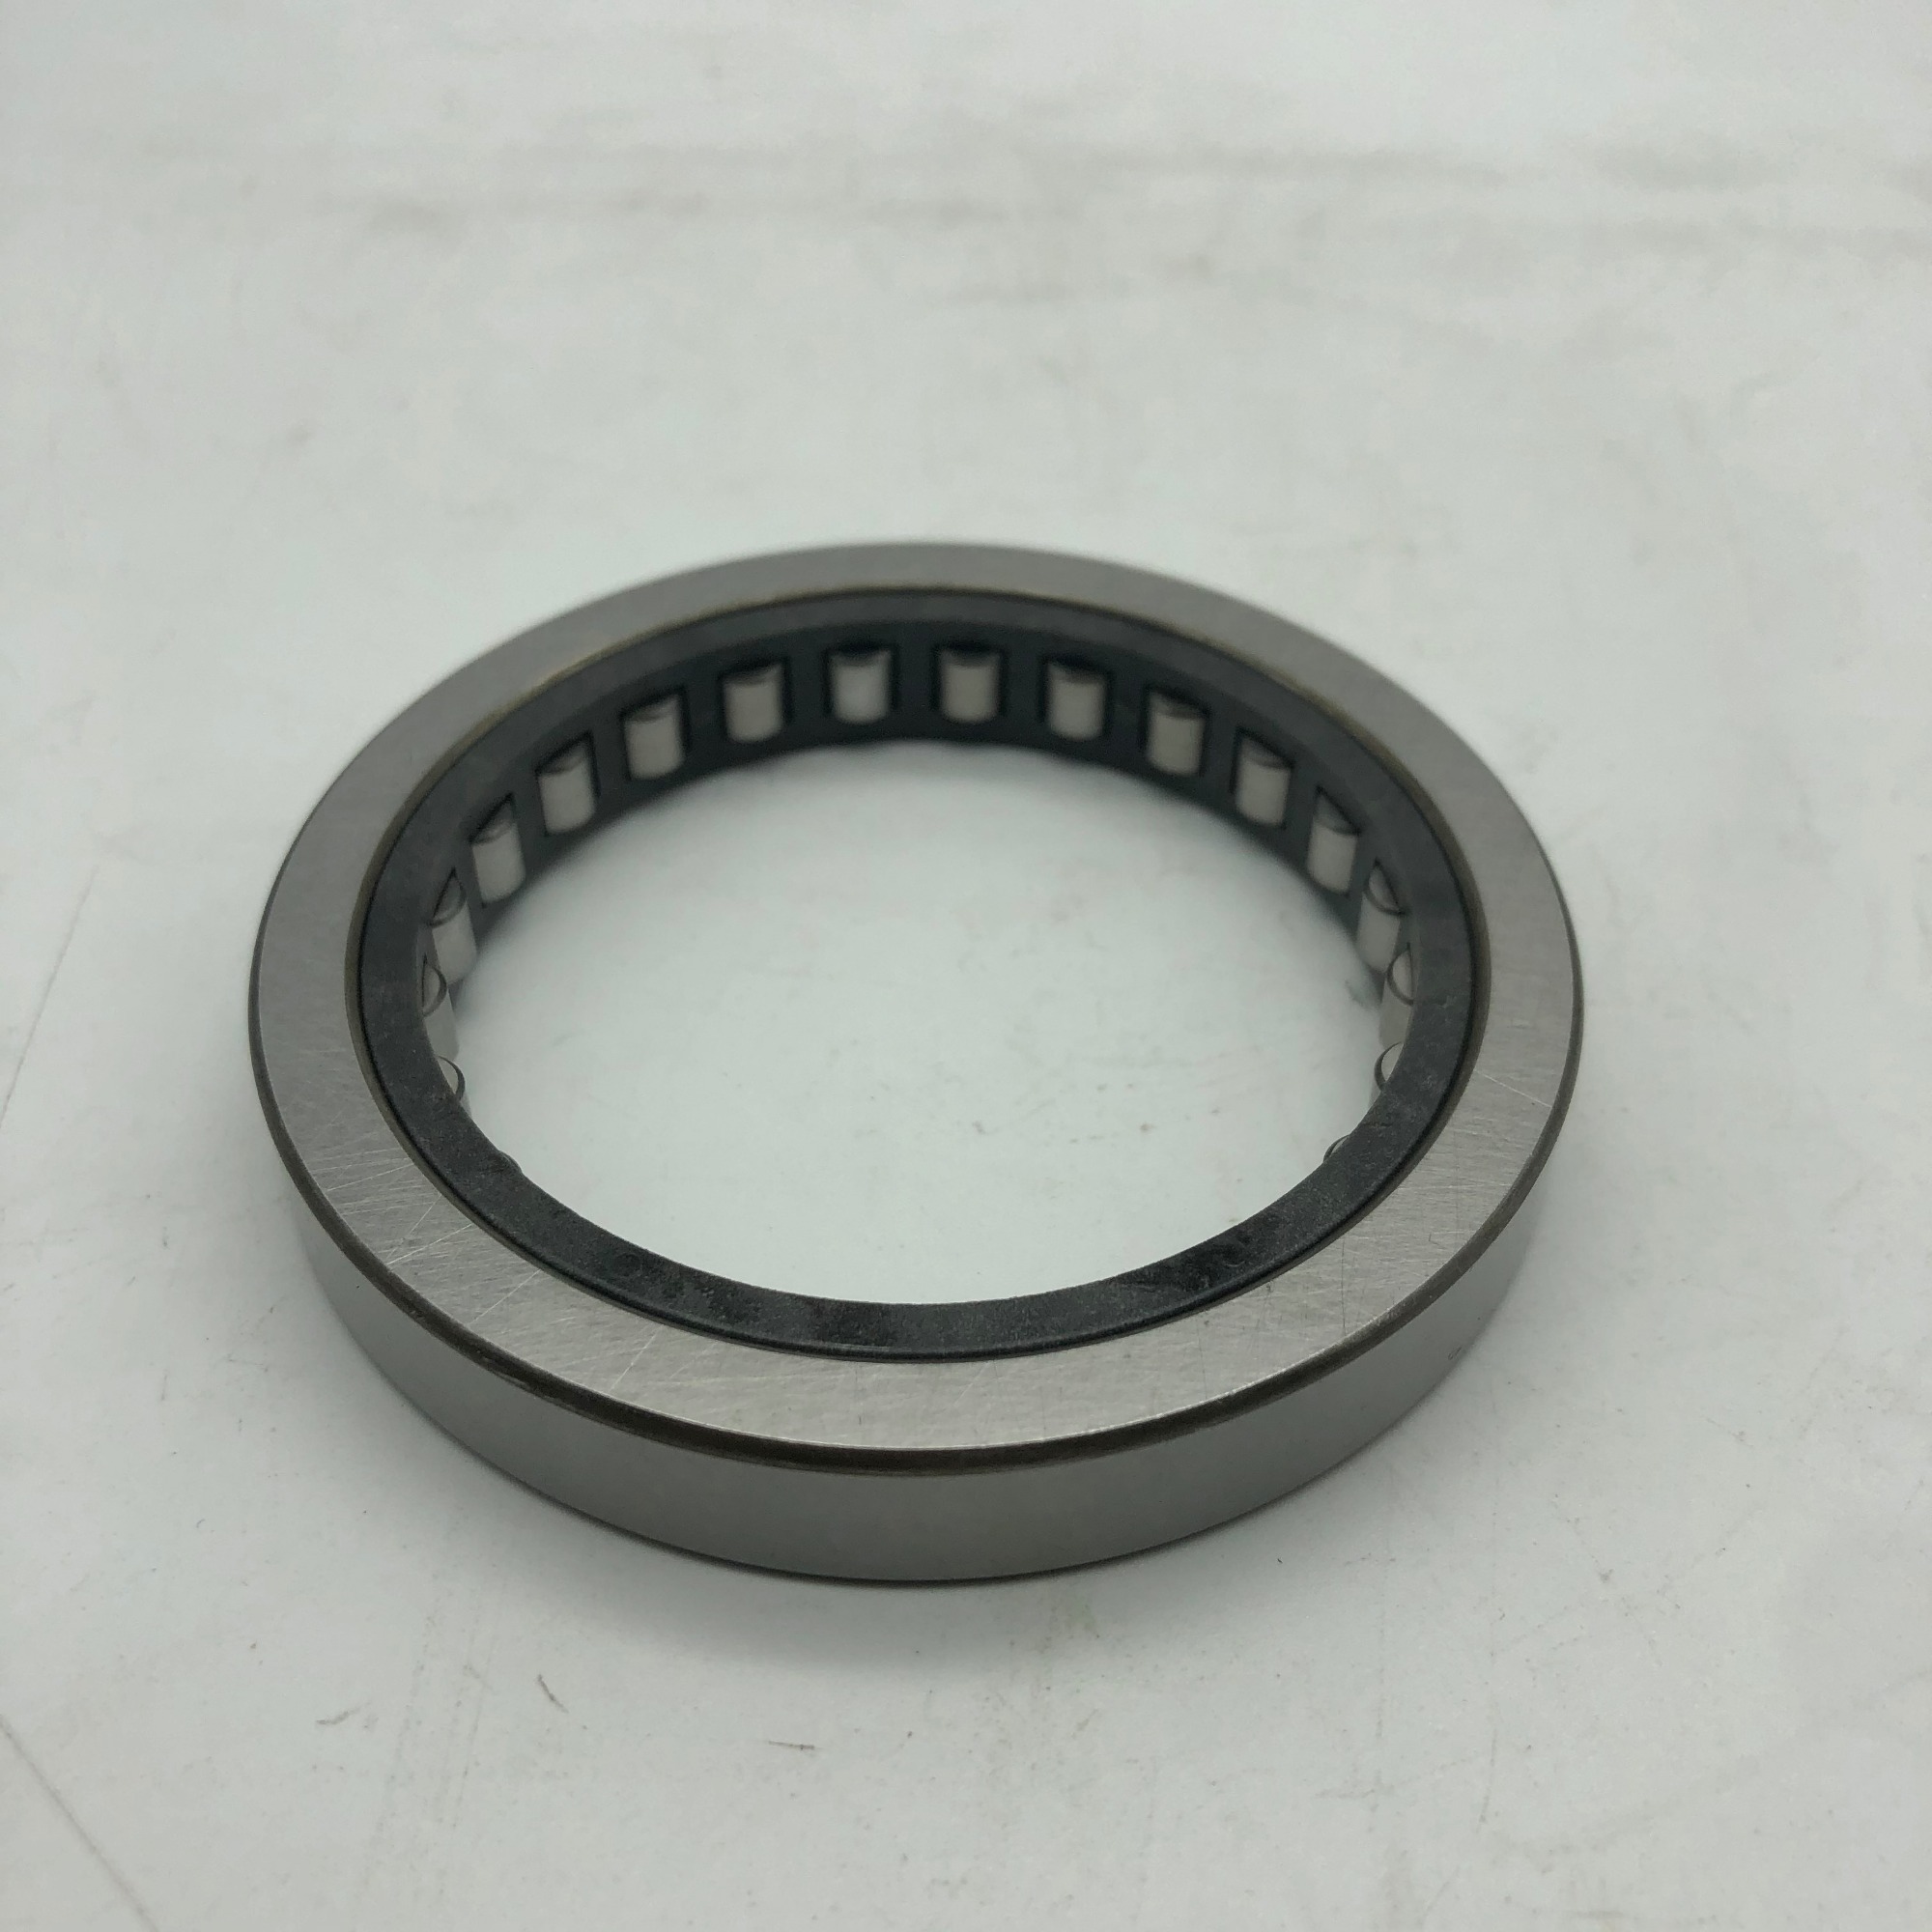 VP55-2 Automobile Bearing / Cylindrical Roller Bearing 55x76x11mm